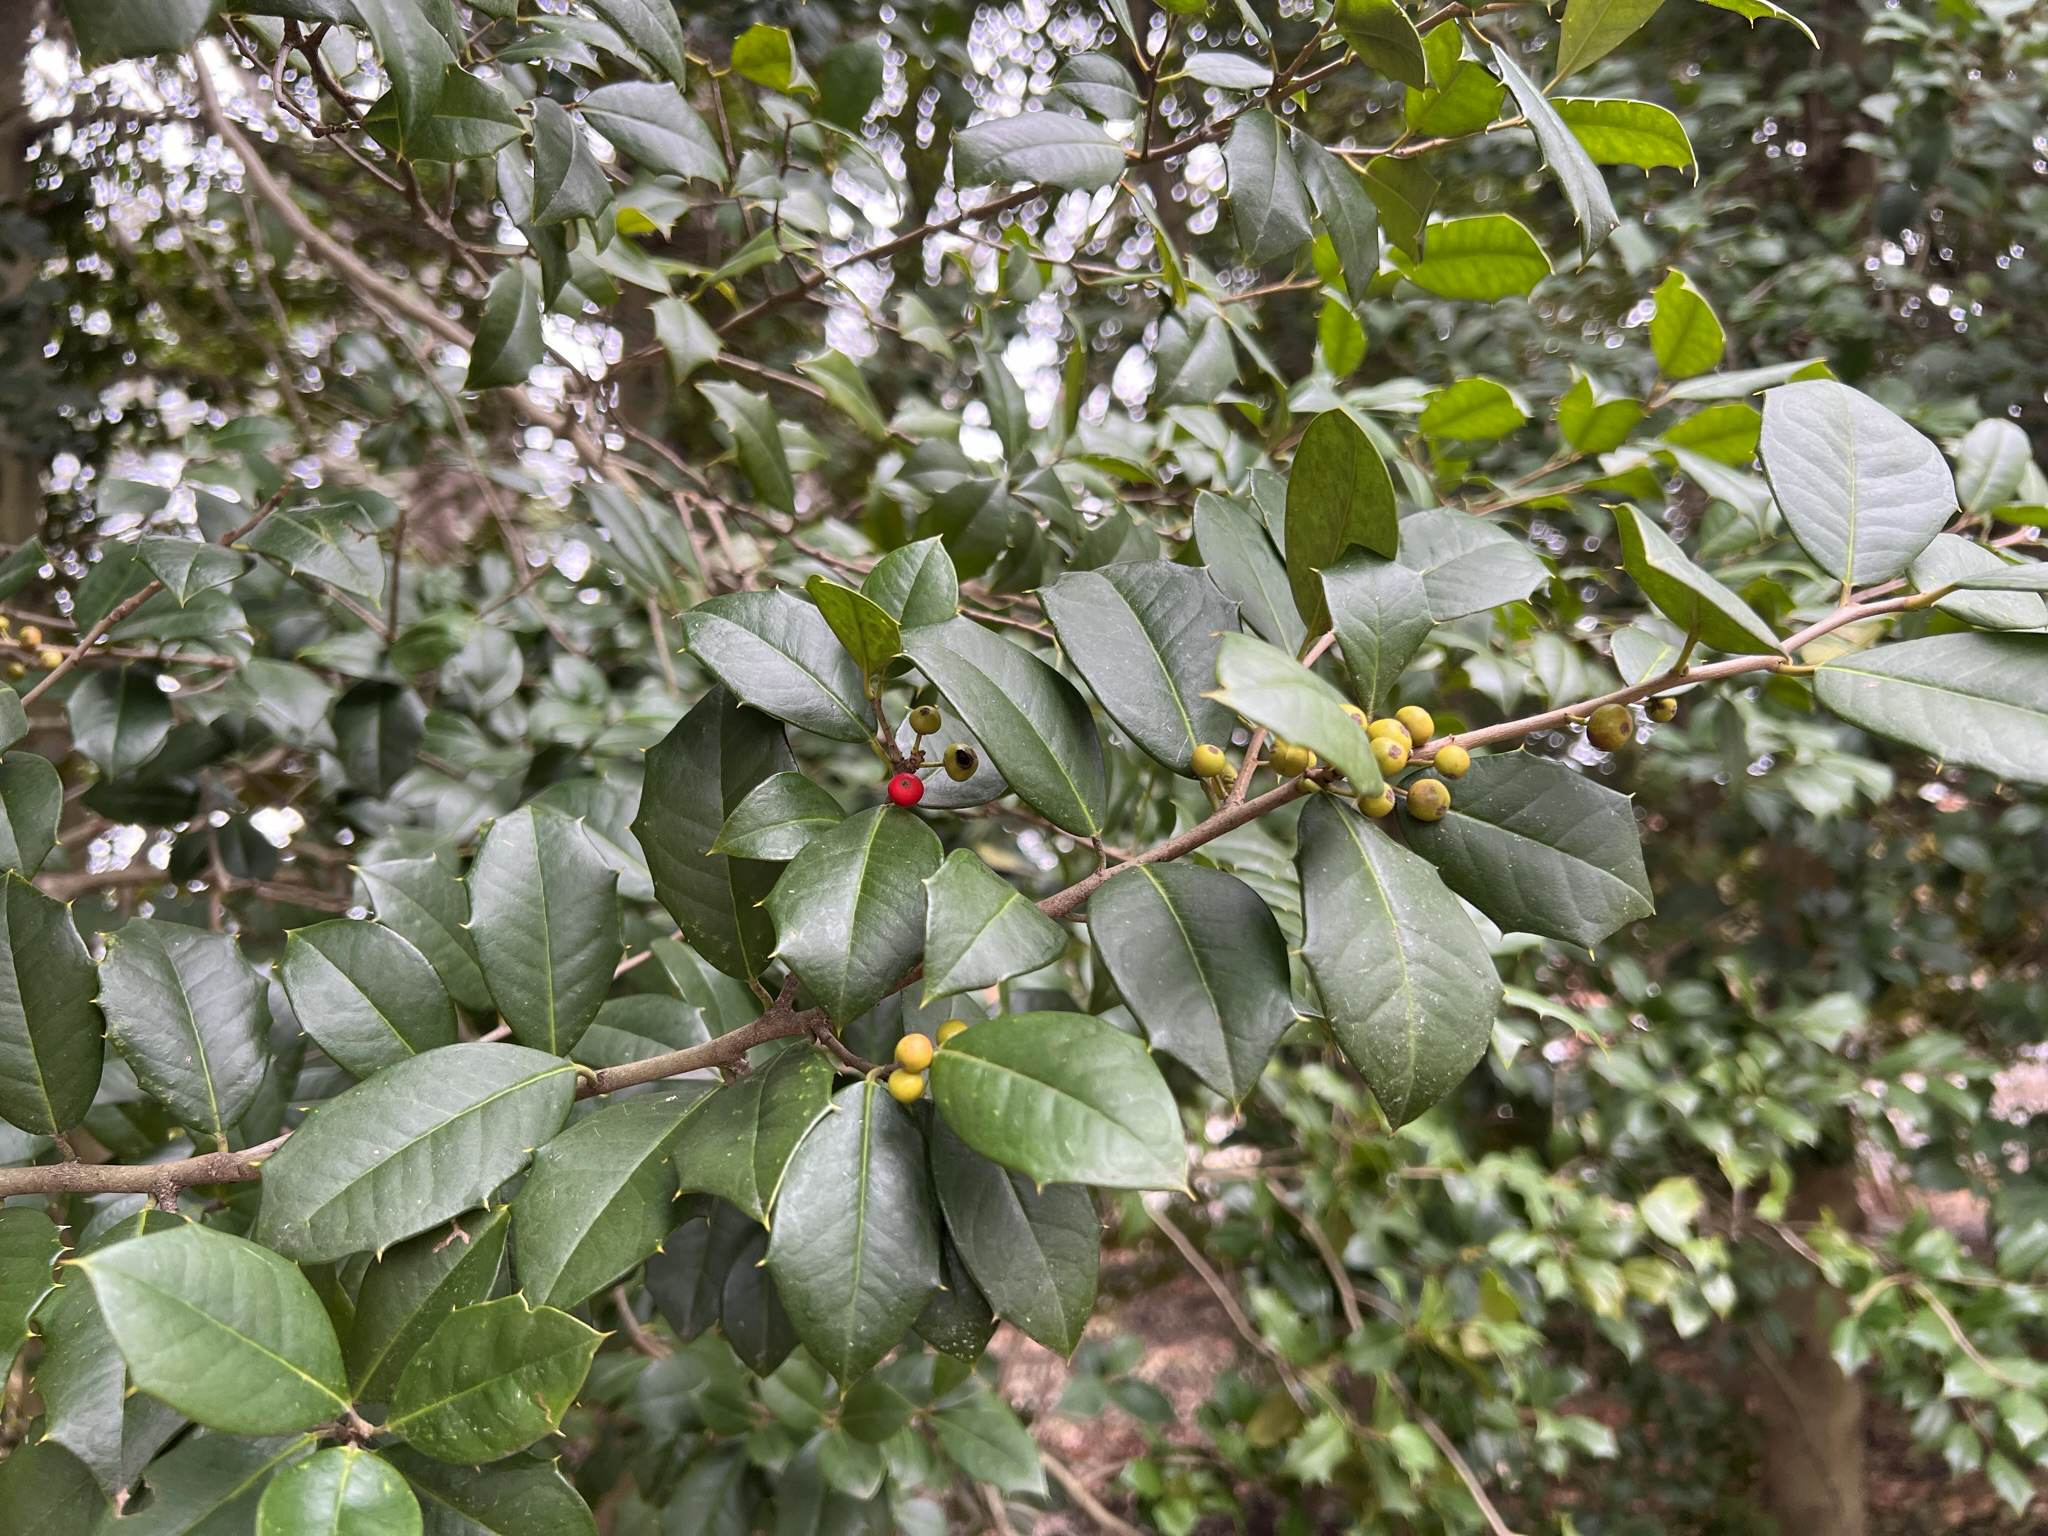 green leaves with red and yellow berries